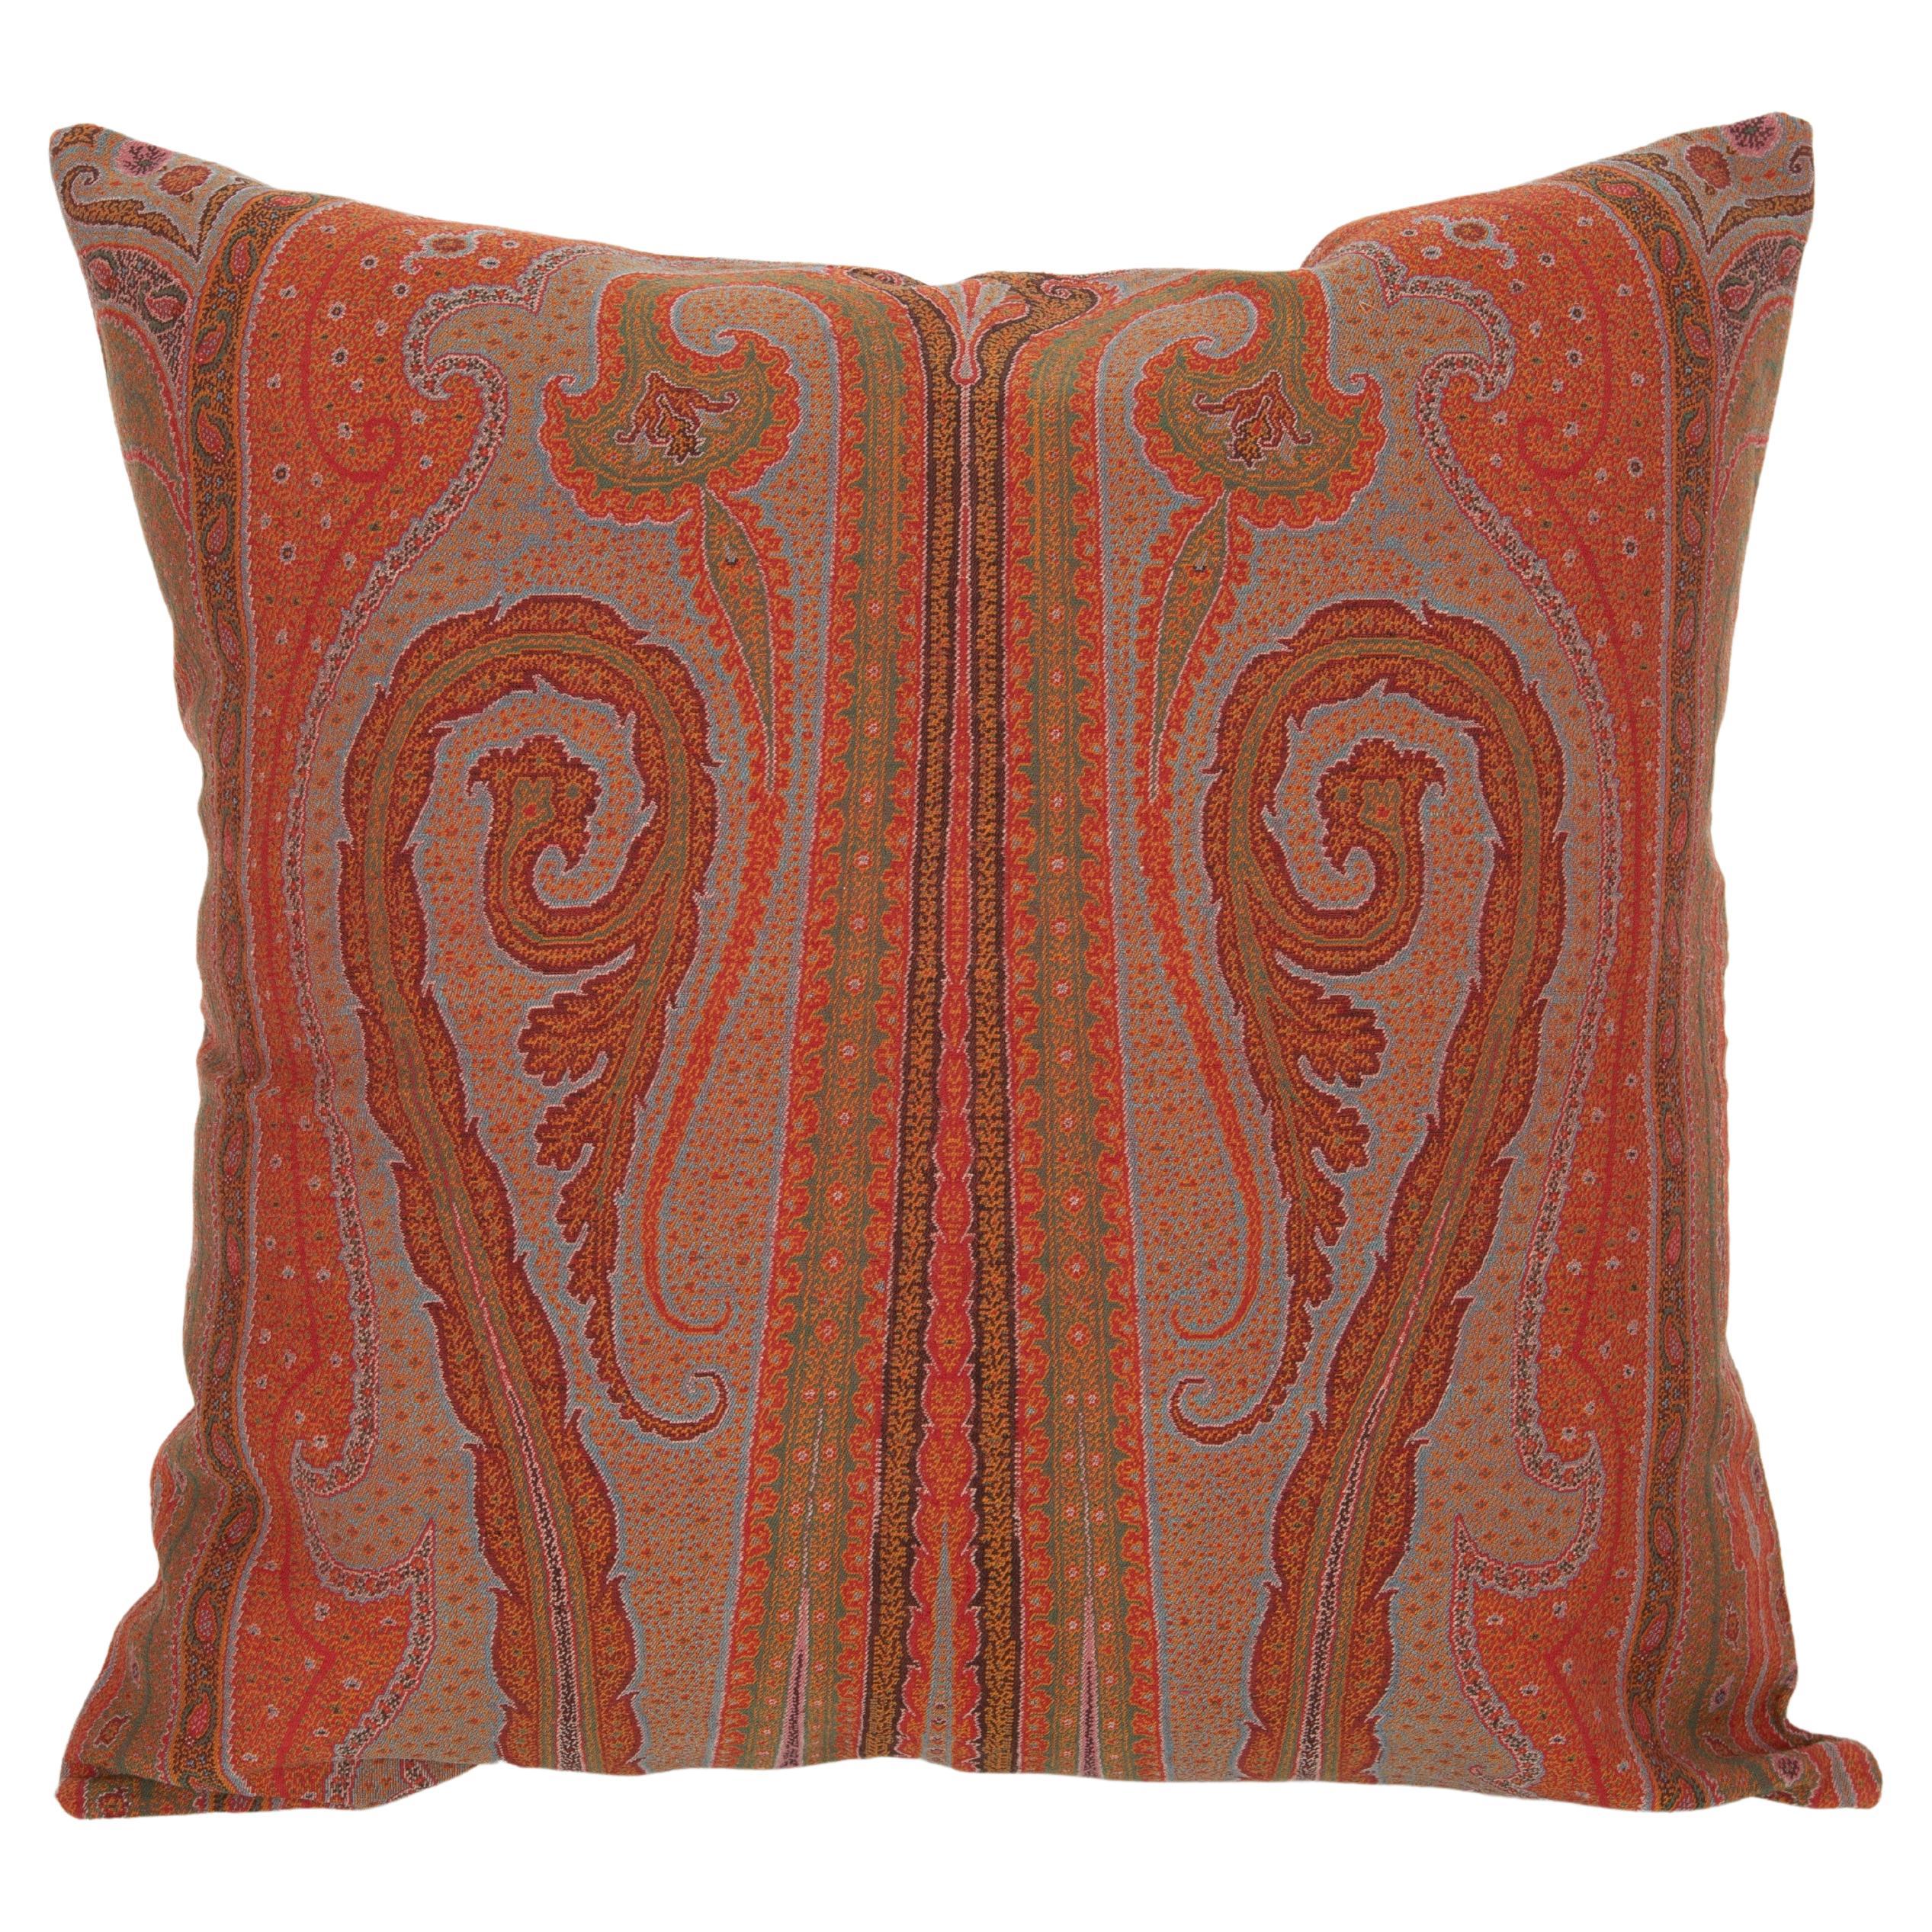 Antique  Pillow Cover made from a European Wool Paisley Shawl, L 19th/ E.20th  For Sale